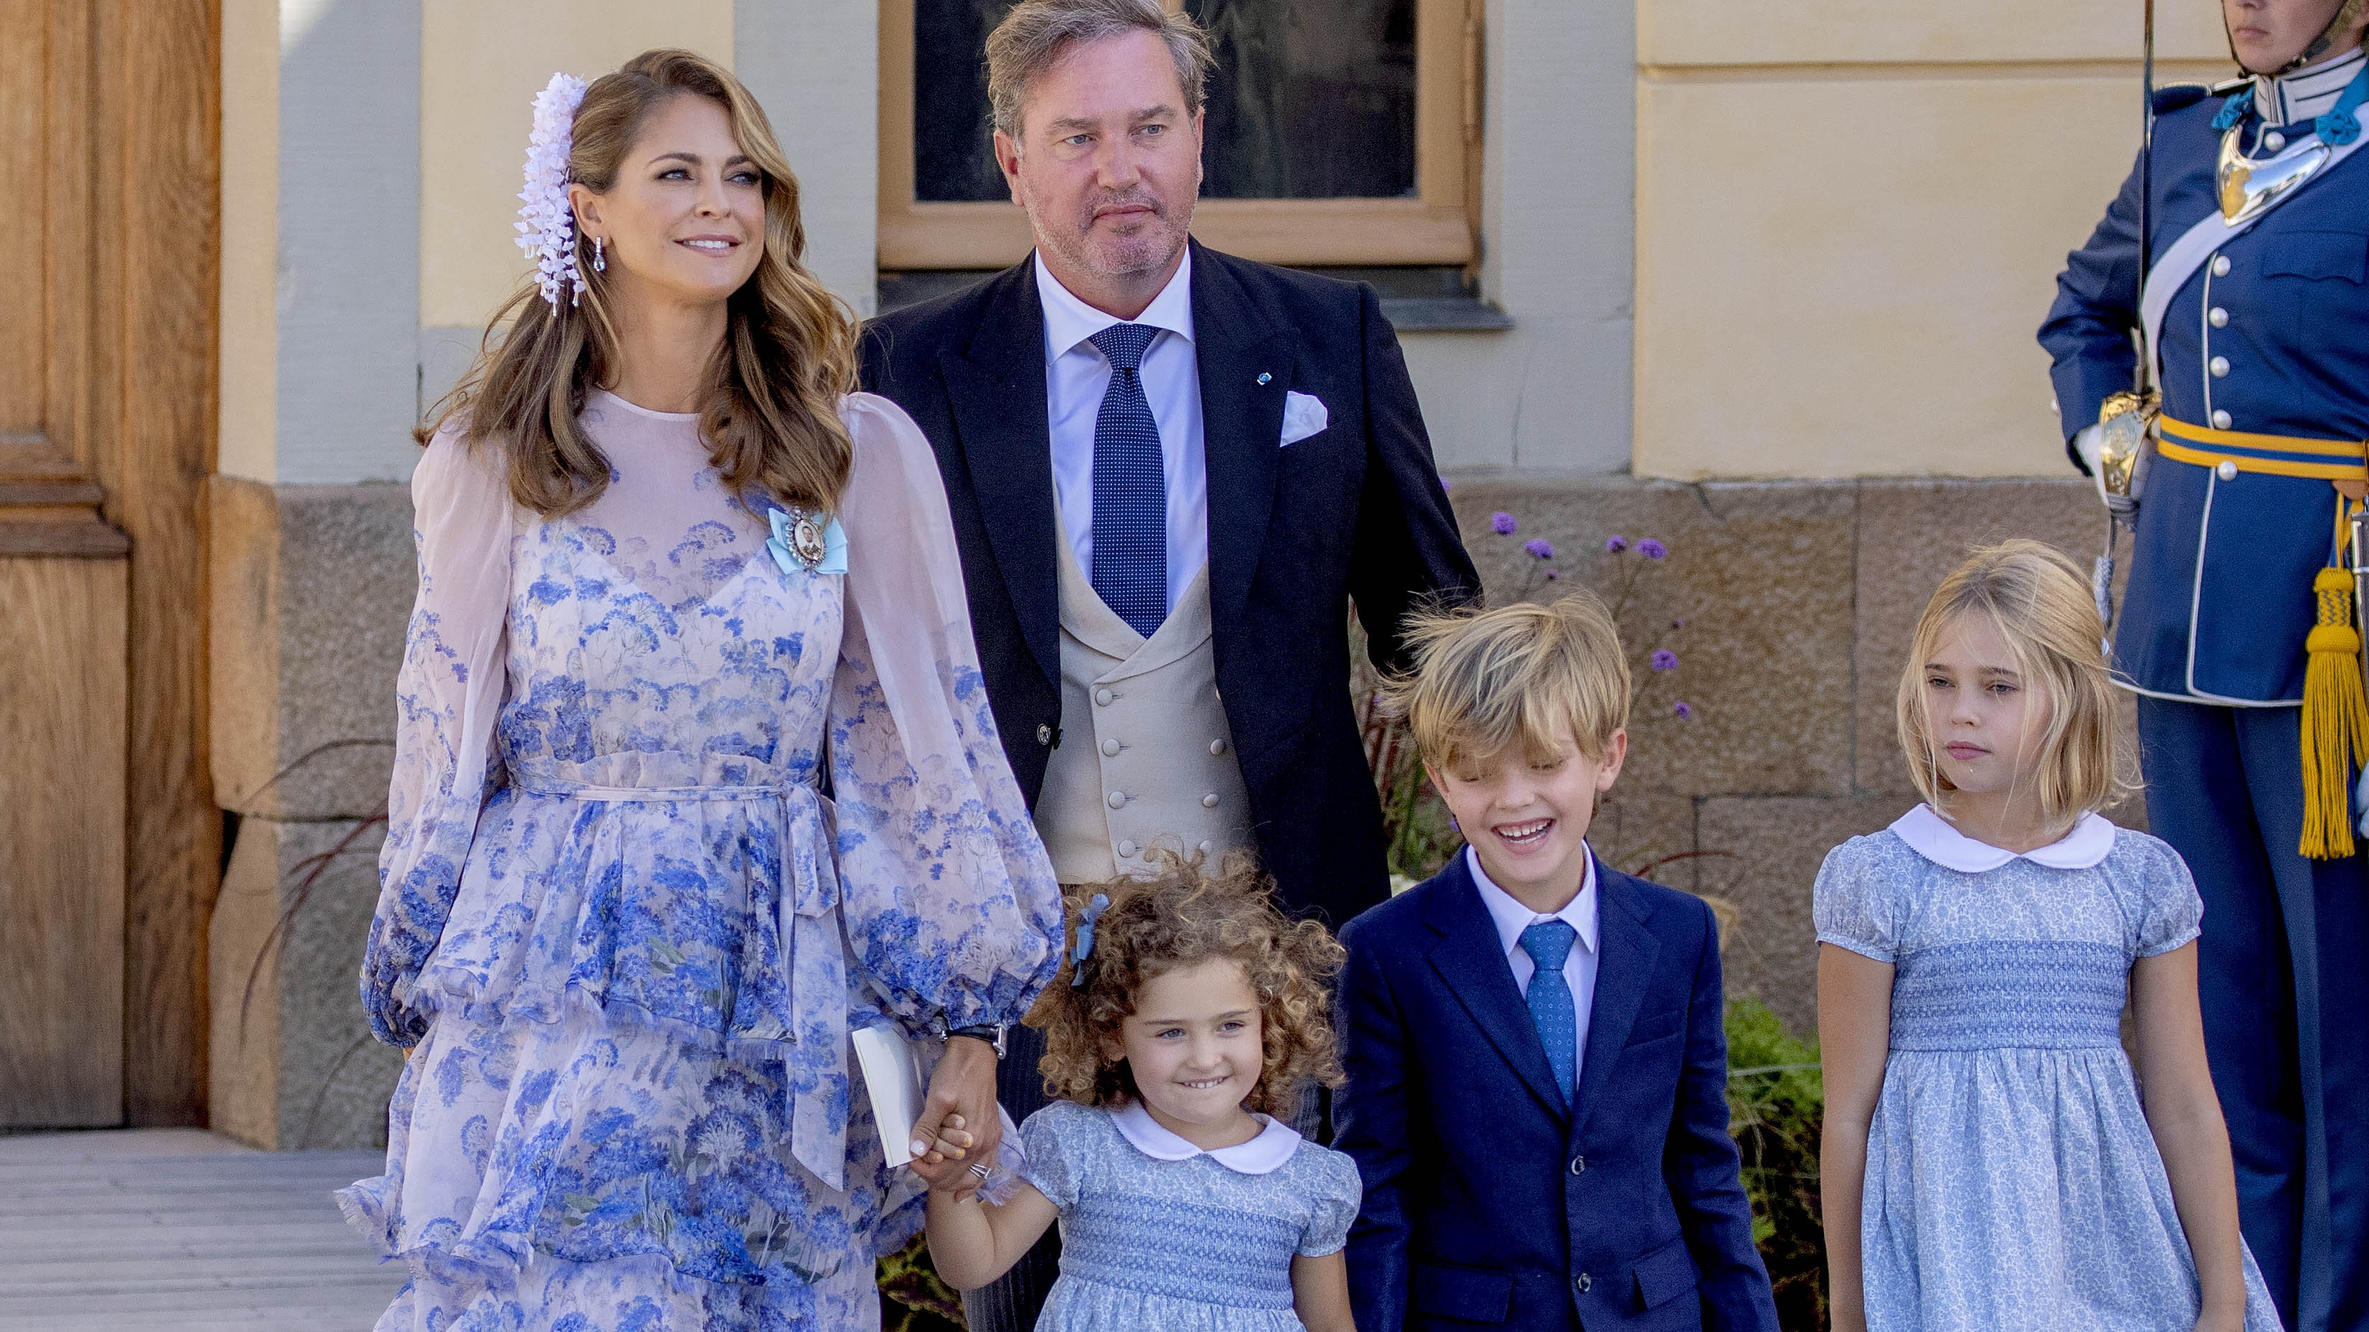 The Swedish royal family reveals details of their children